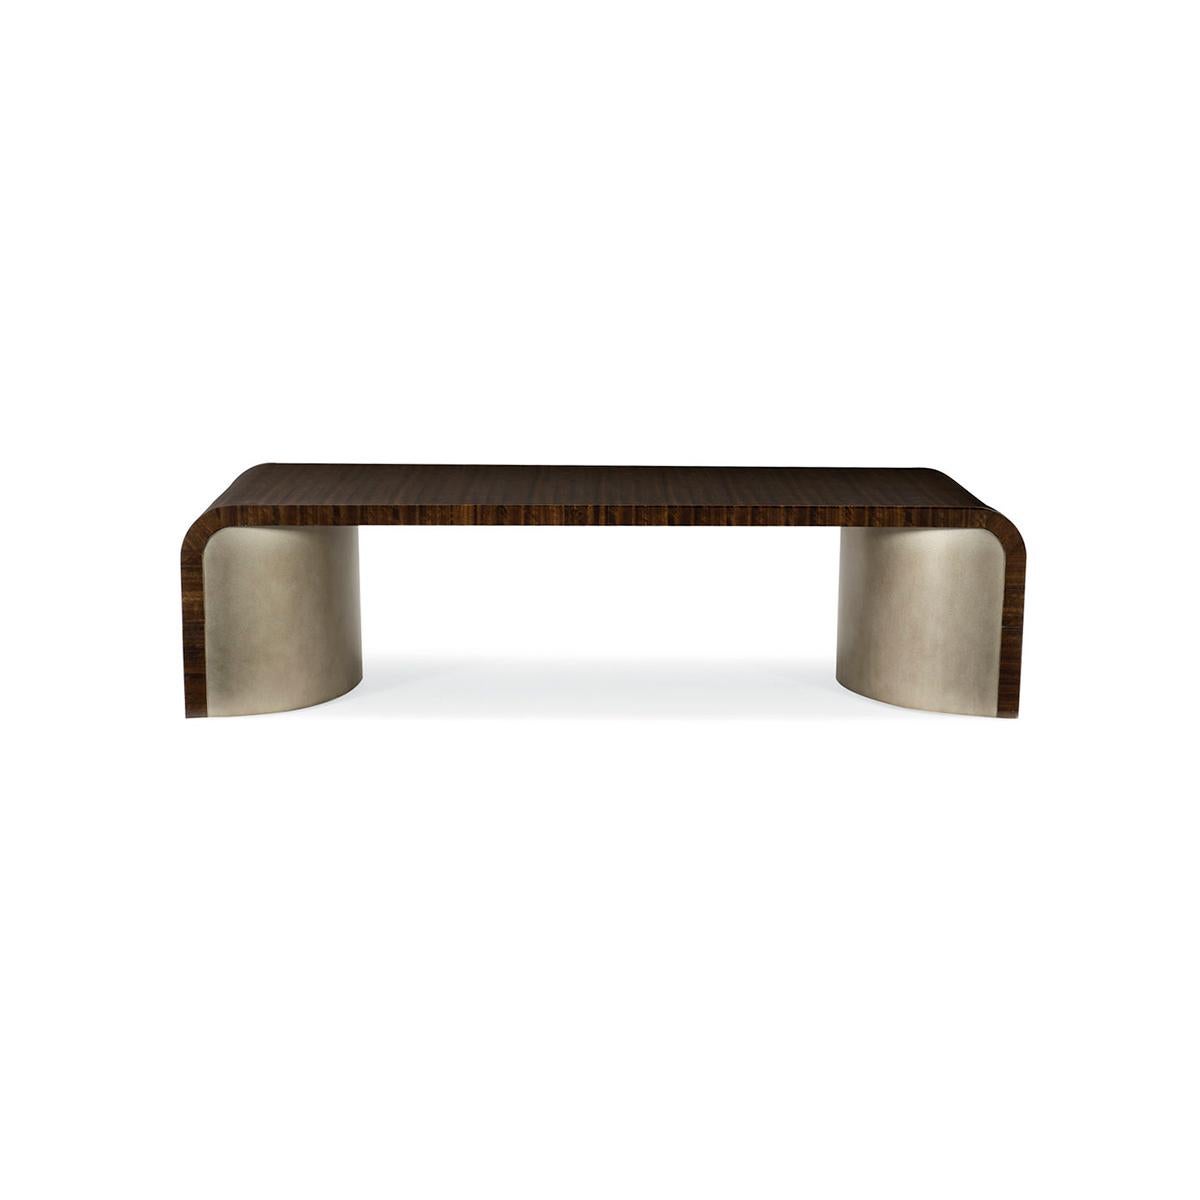 Fumed figured eucalyptus wood, finished to a high sheen in luscious Aged Bourbon, wraps the top of this rectangular table that is void of sharp angles. Two large, half-moon-shaped pedestals support the piece and are covered in Smoked Bronze. The